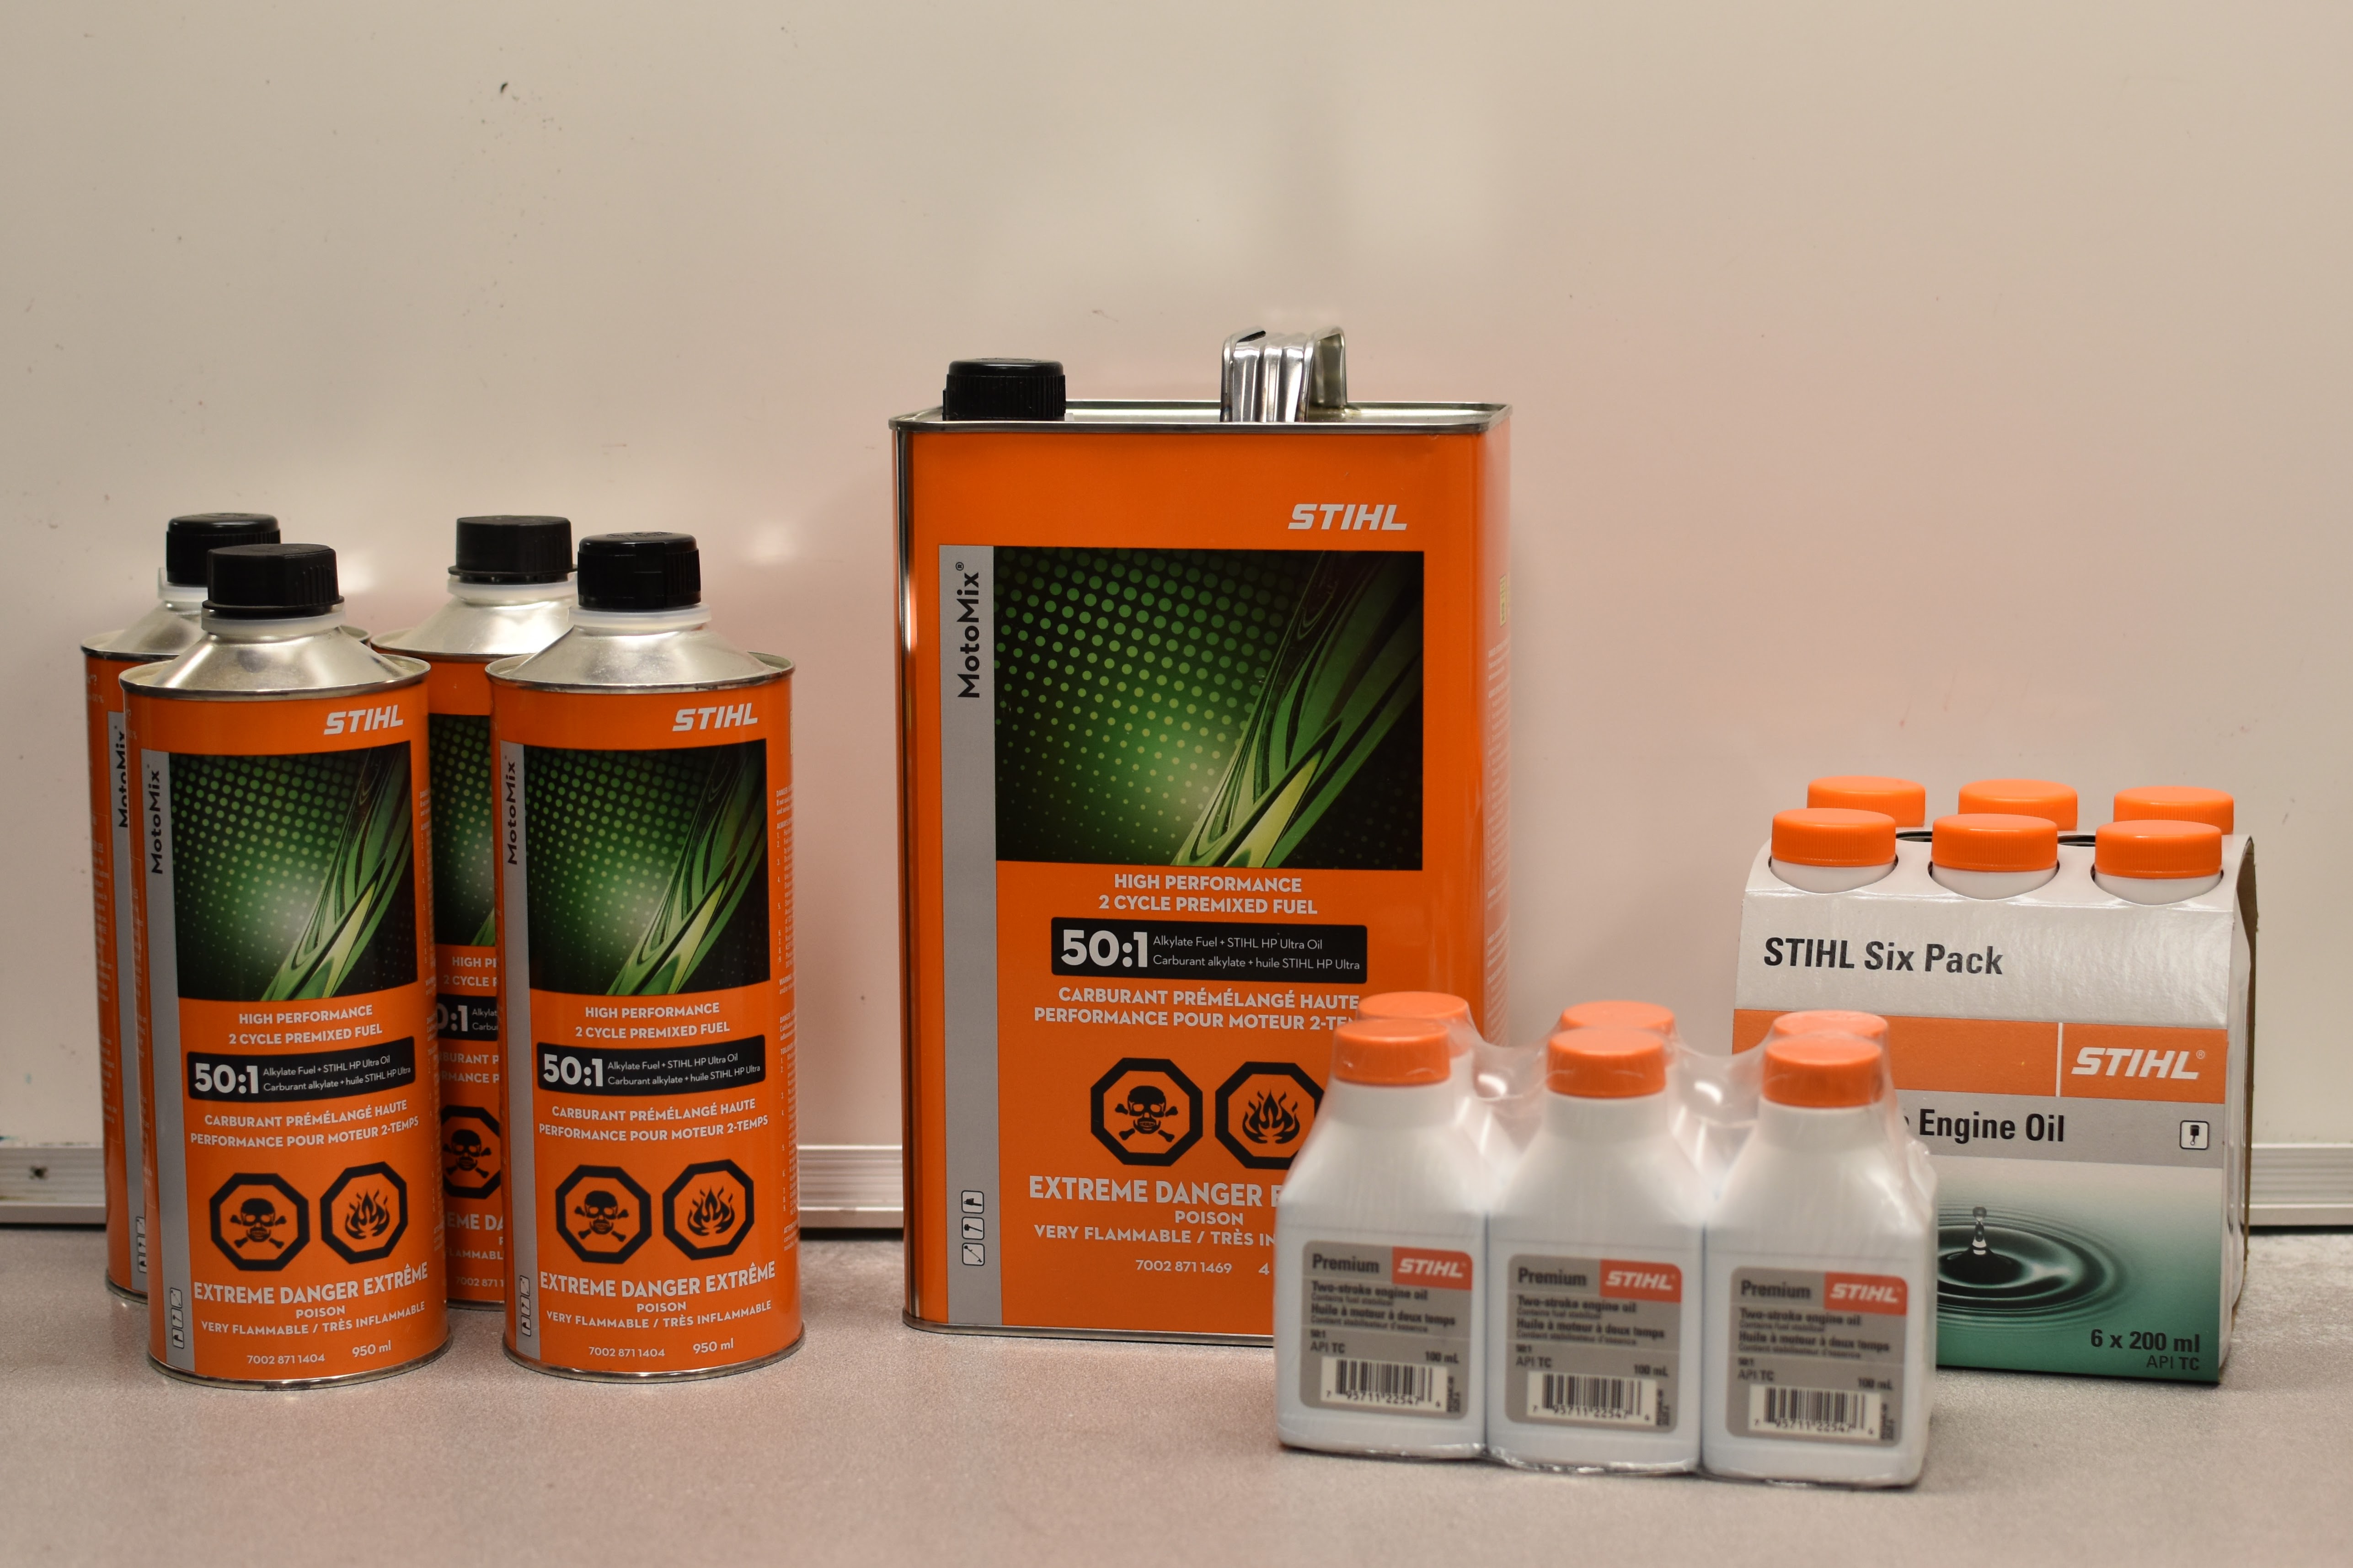 BUY STIHL MIX OILS OR FUEL AND UPGRADE TO 2 YR WARRANTY